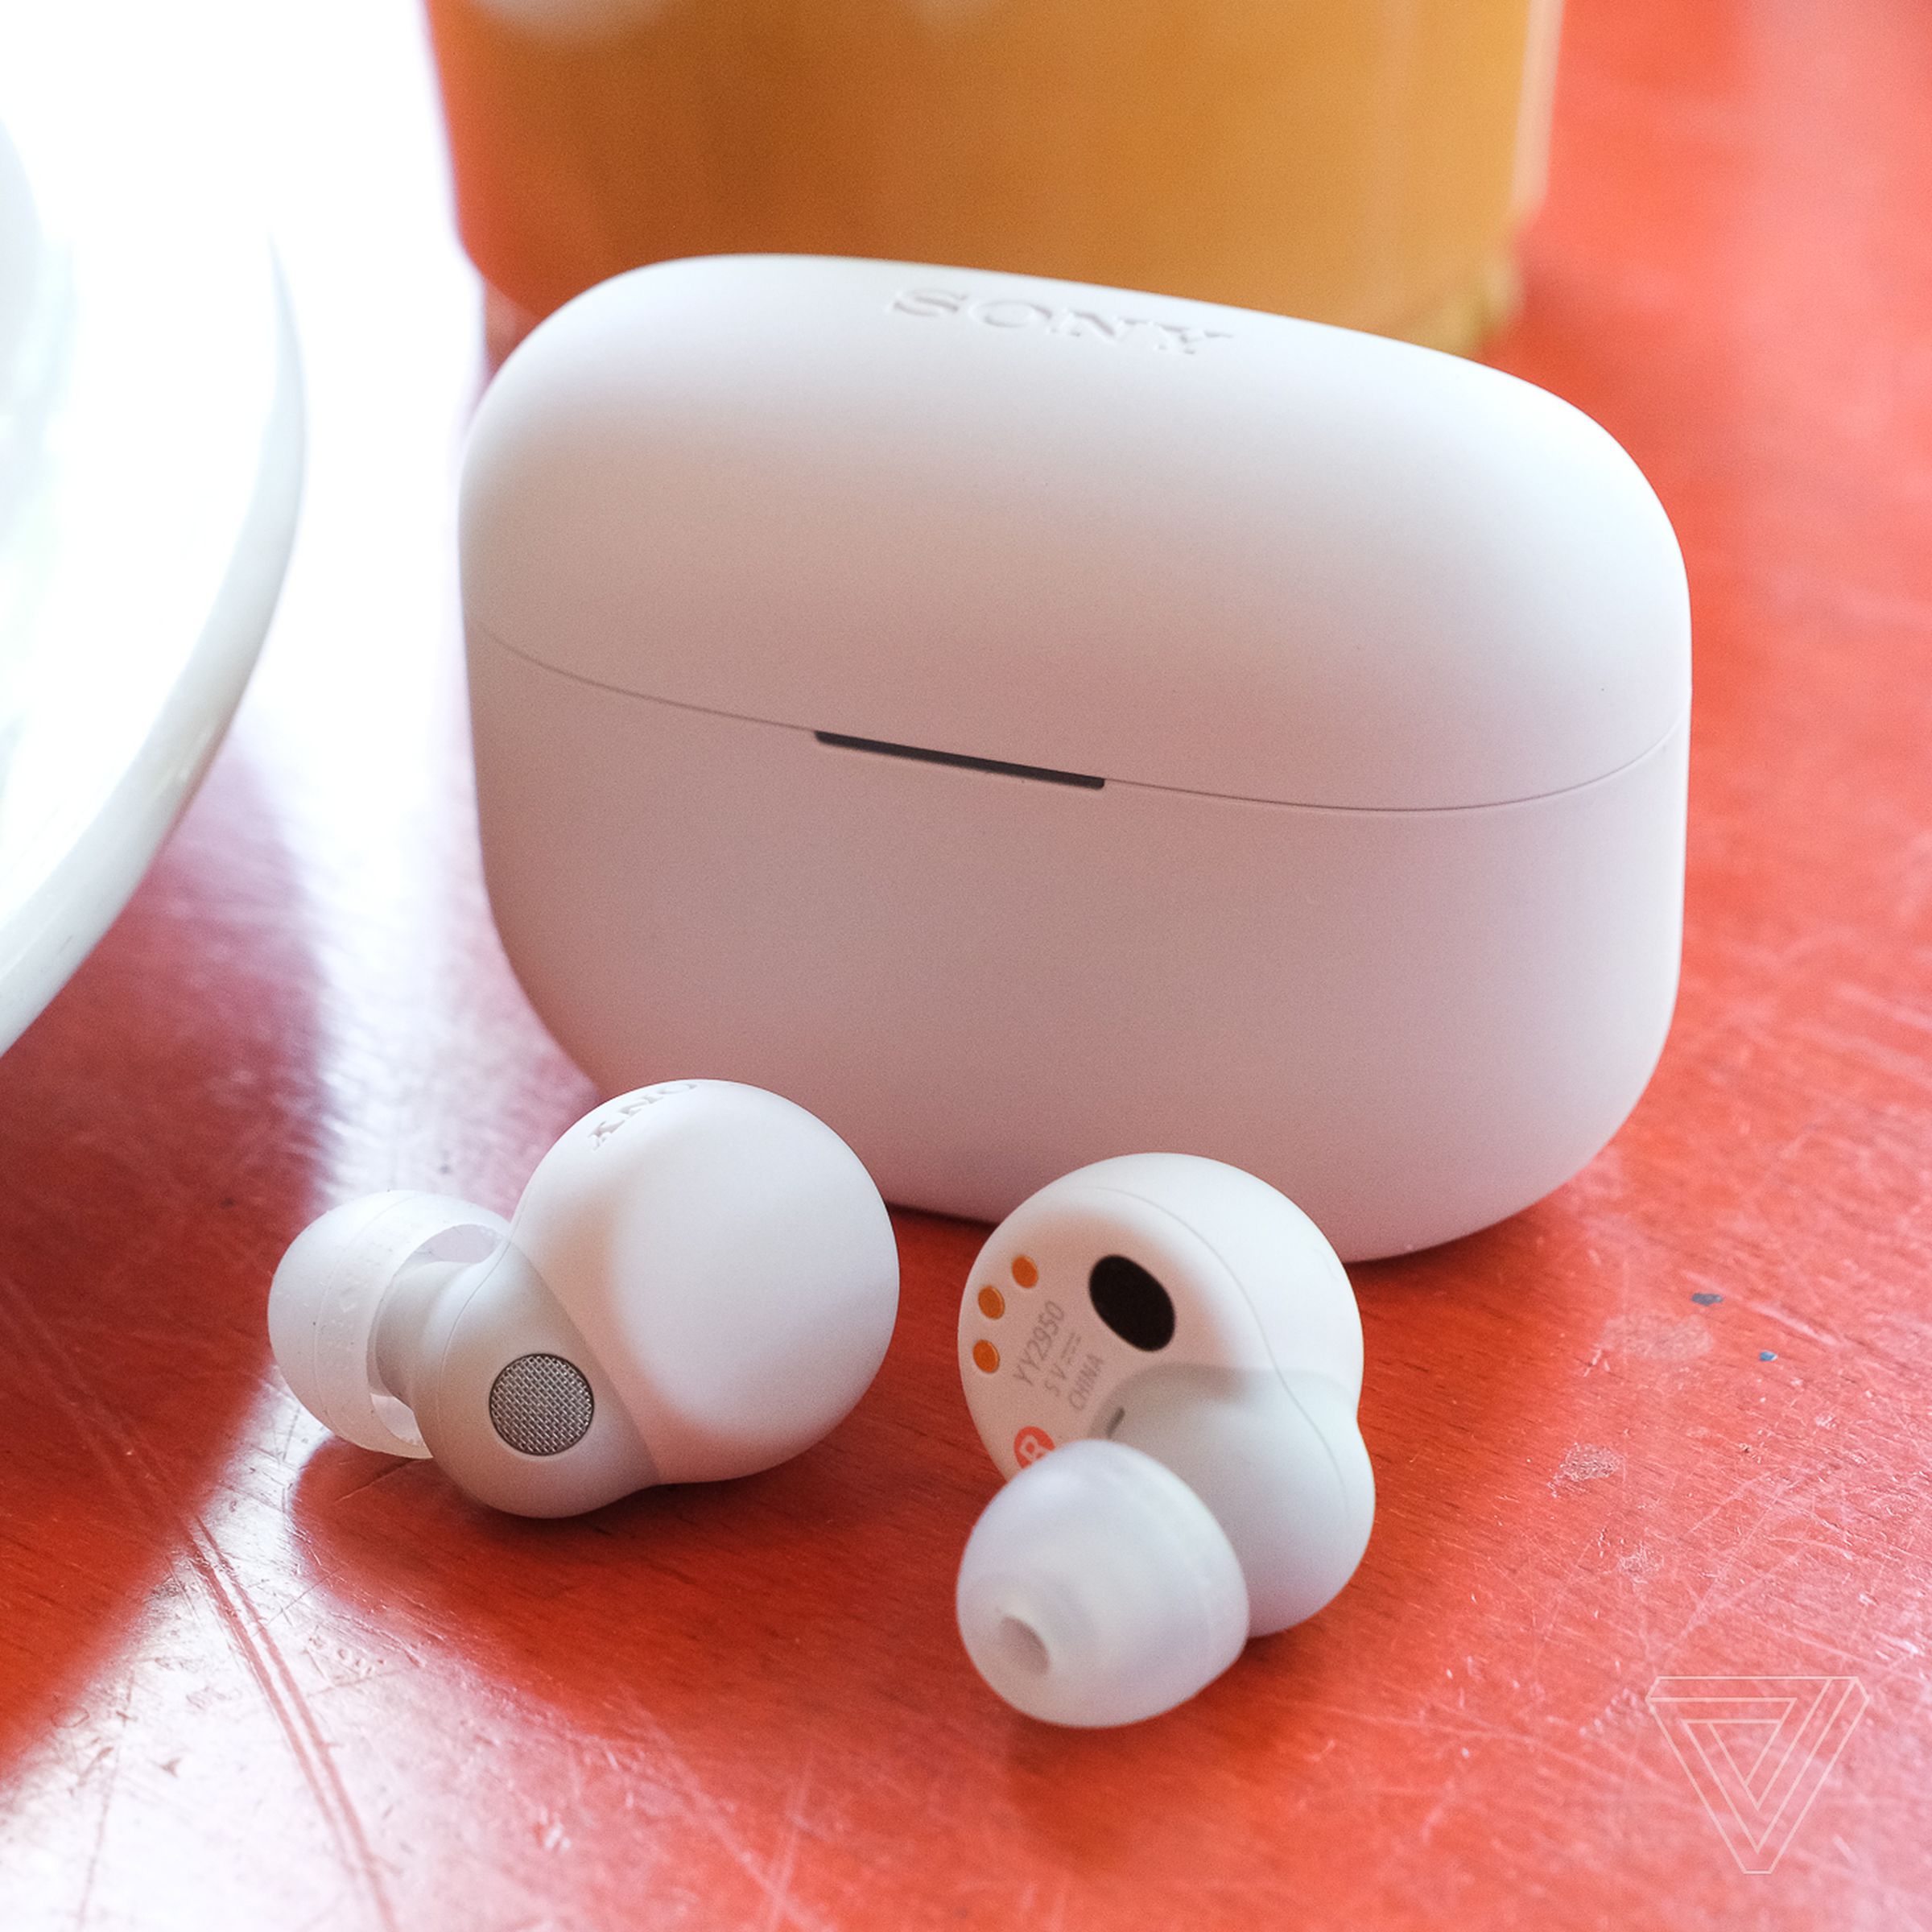 The white Sony LinkBuds S earbuds resting on a table outside their case, beside a plate of food.